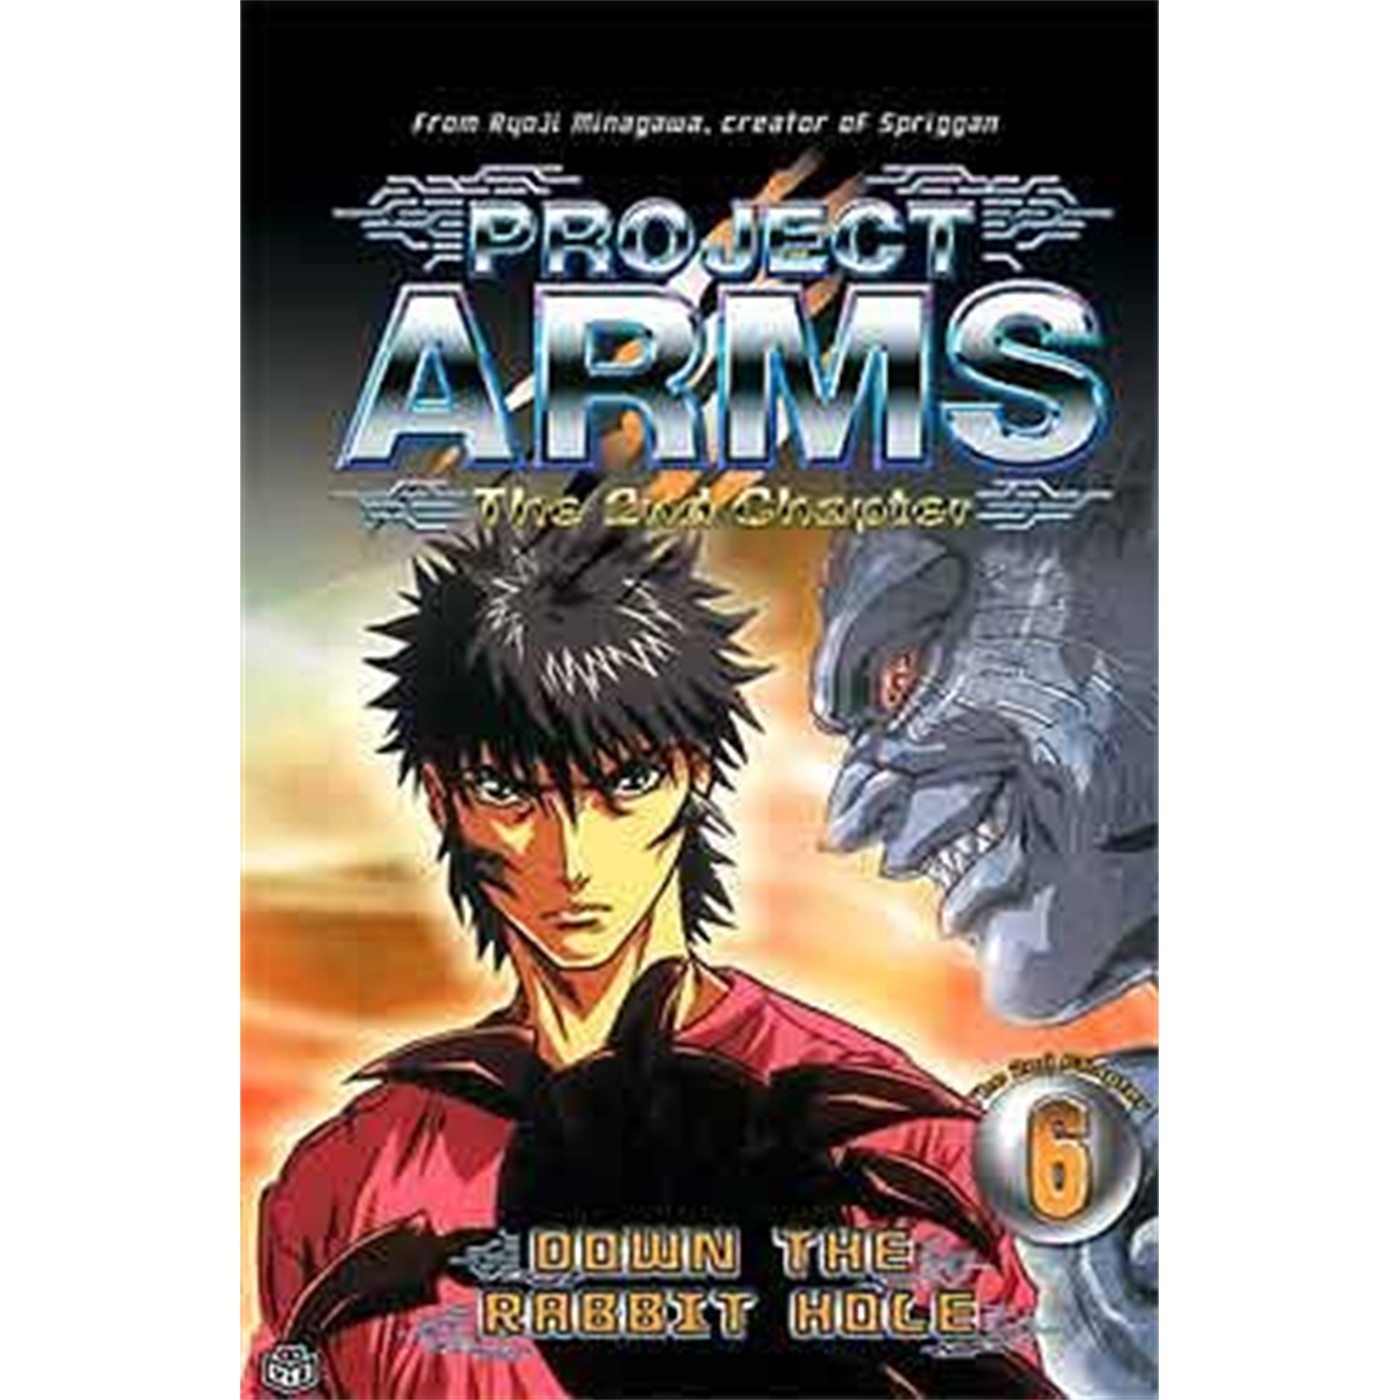 Project Arms: Second Chapter, Vol. 15 (DVD)